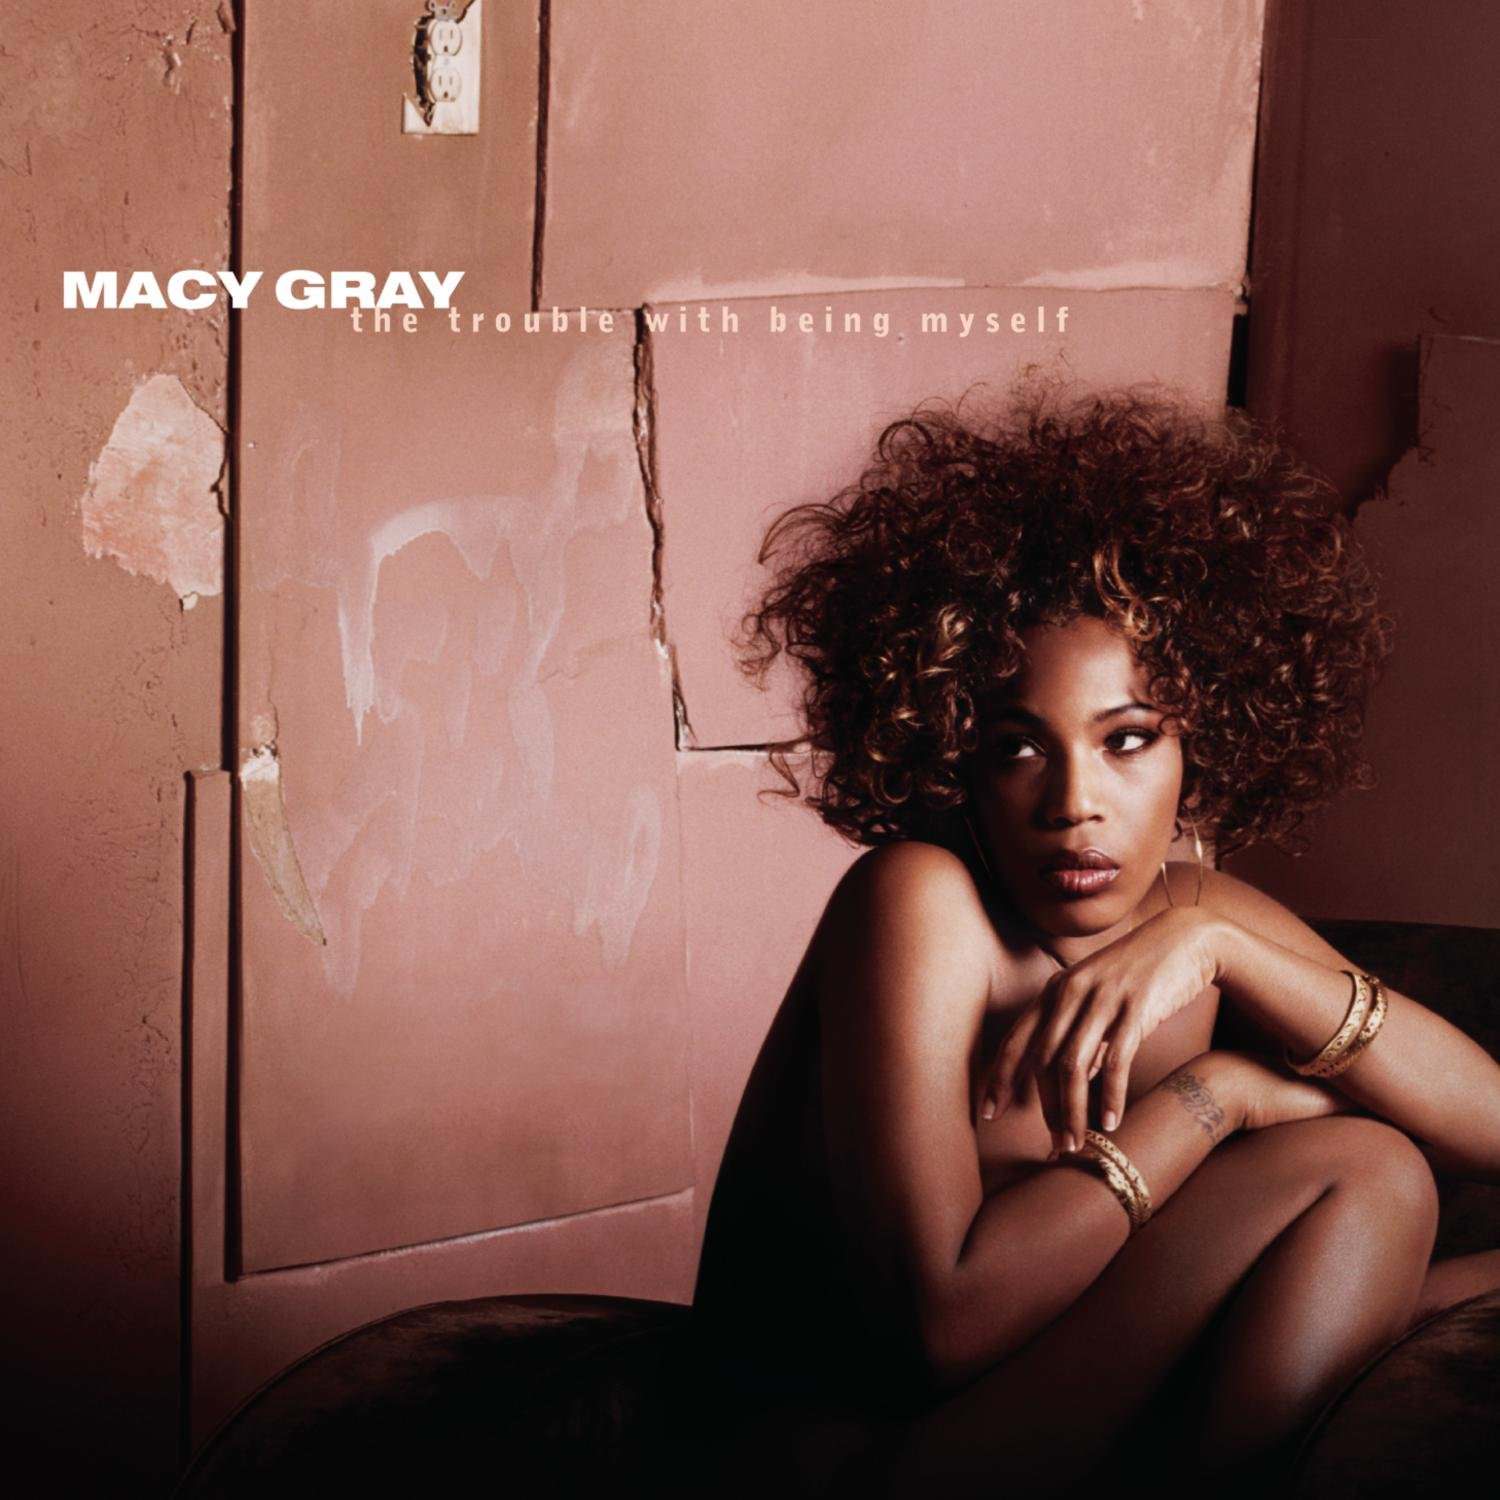 Macy Gray - The Trouble With Being Myself (2003) [AcousticSounds DSF DSD64/2,82MHz + FLAC 24bit/88,2kHz]